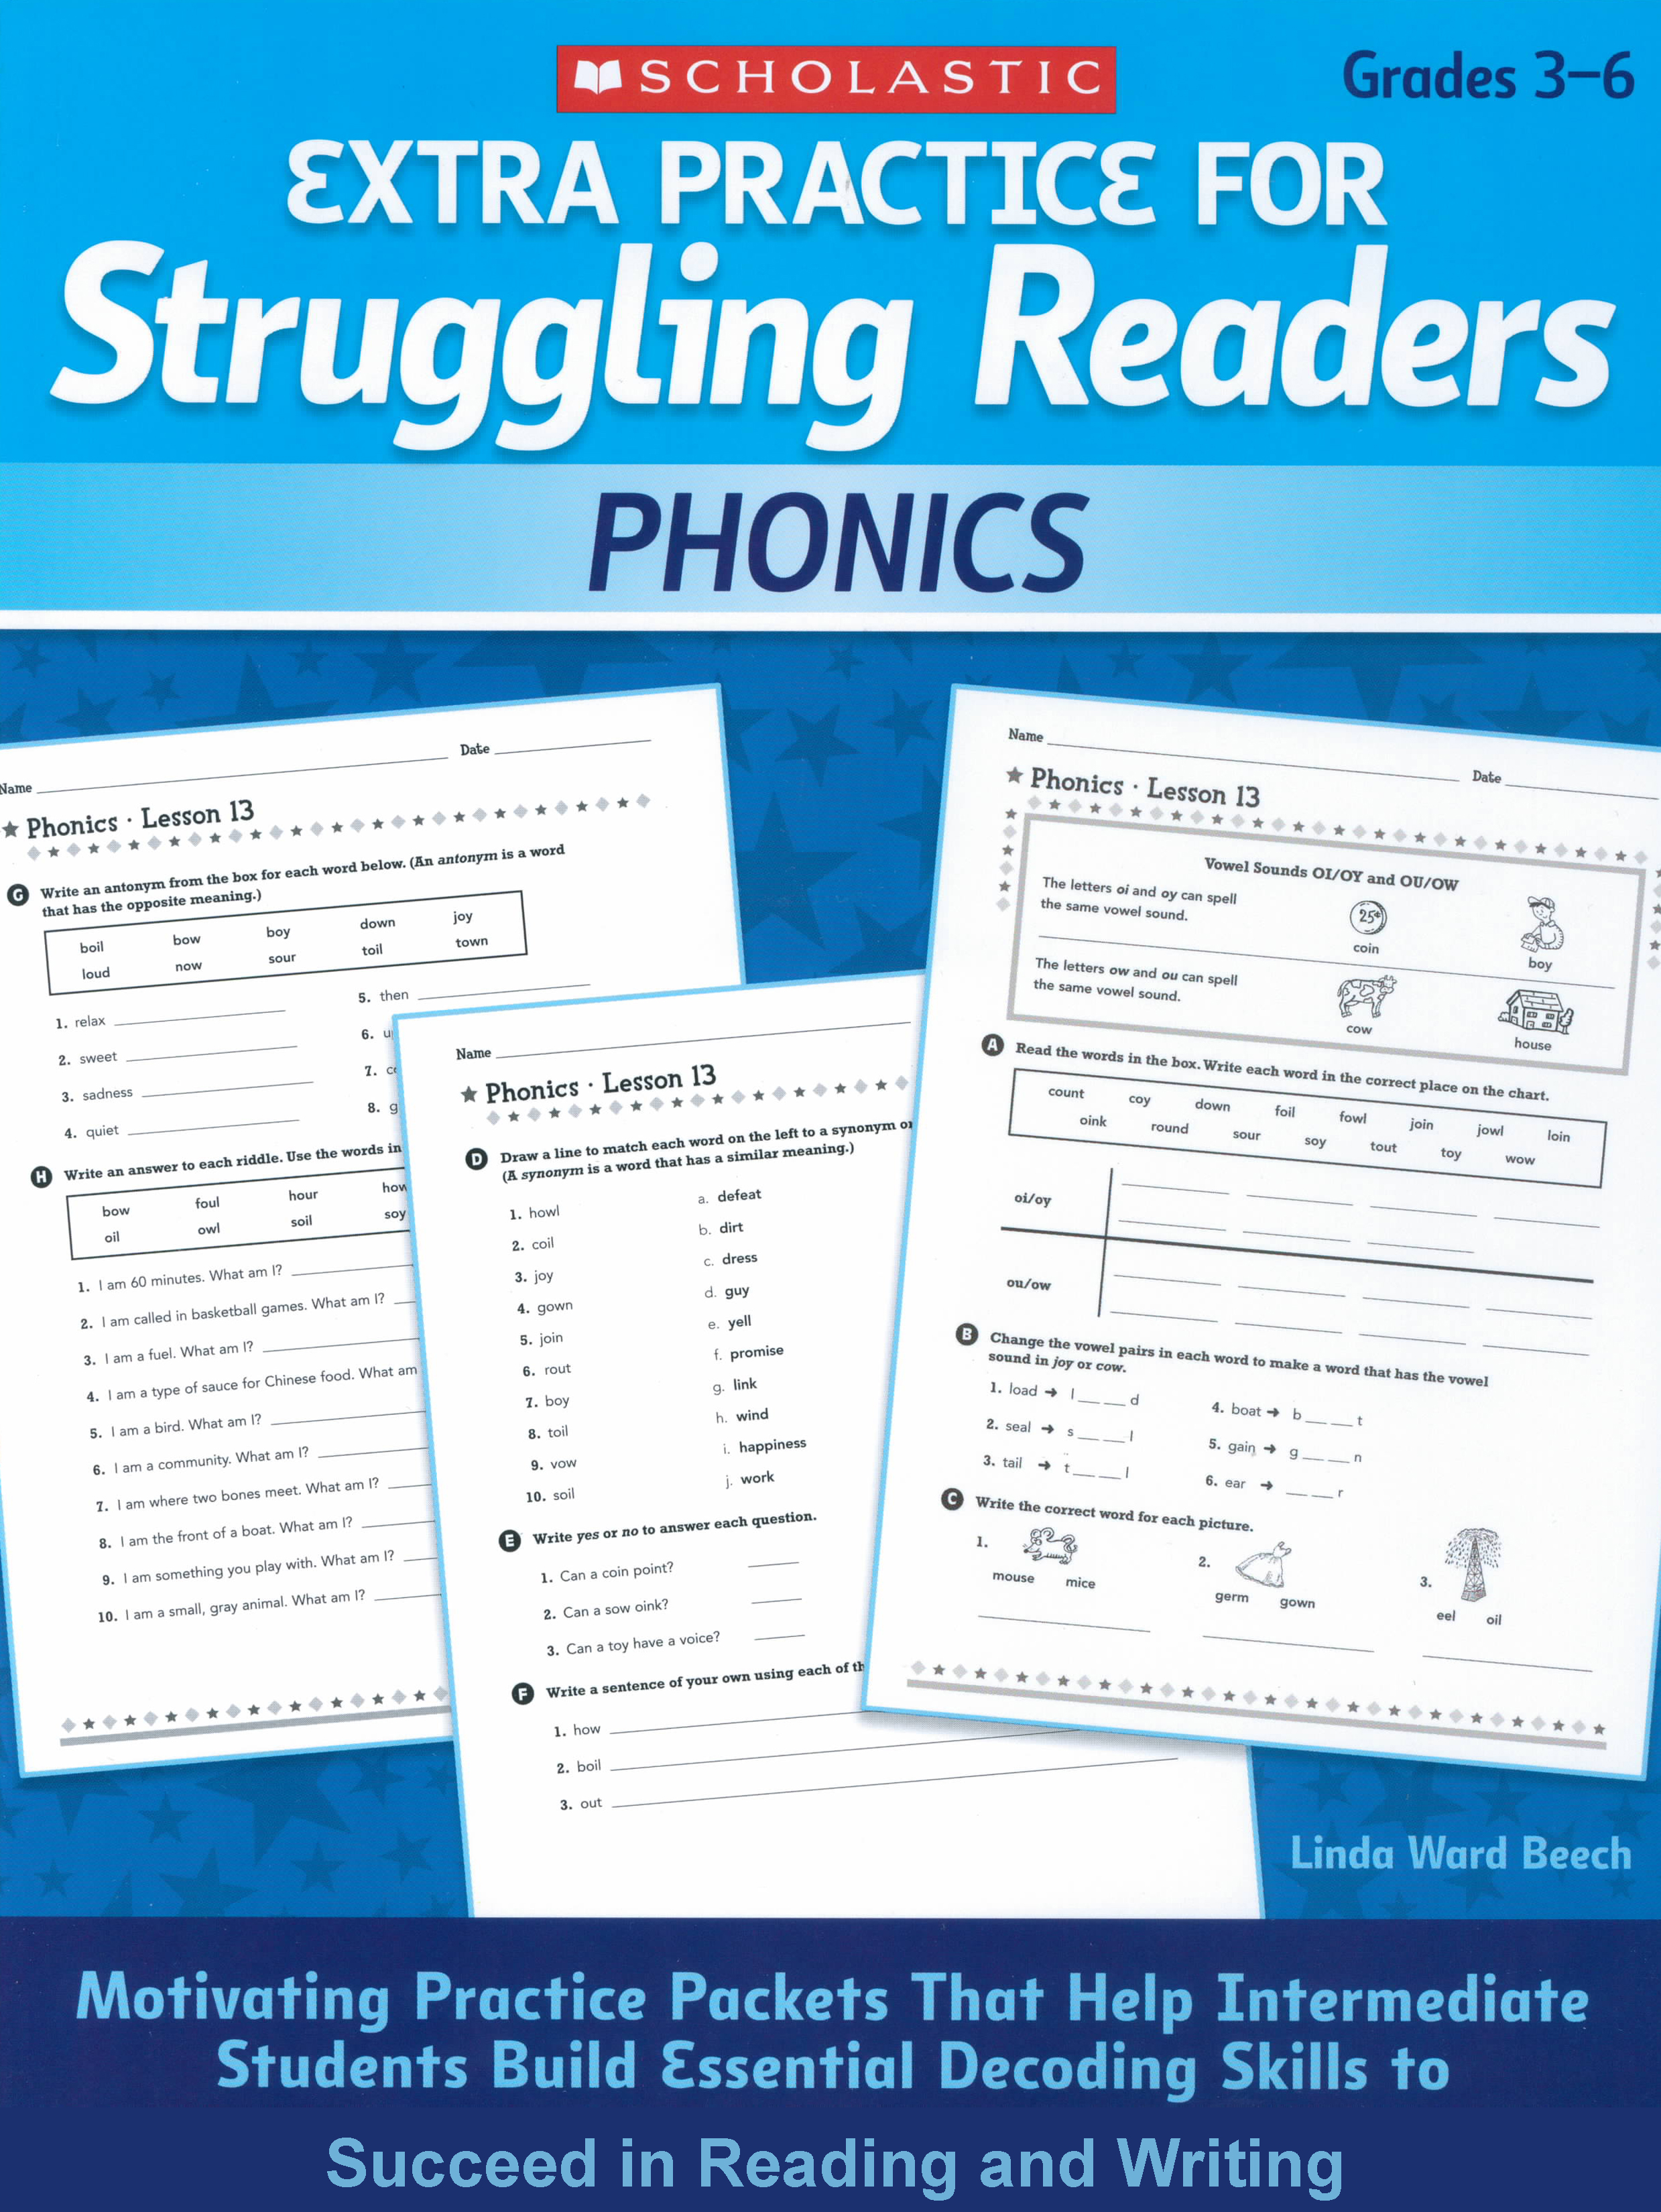 Phonics Grades 3-6 (Extra Practice for Struggling Readers) by Linda Ward Beech 108-9780545124096